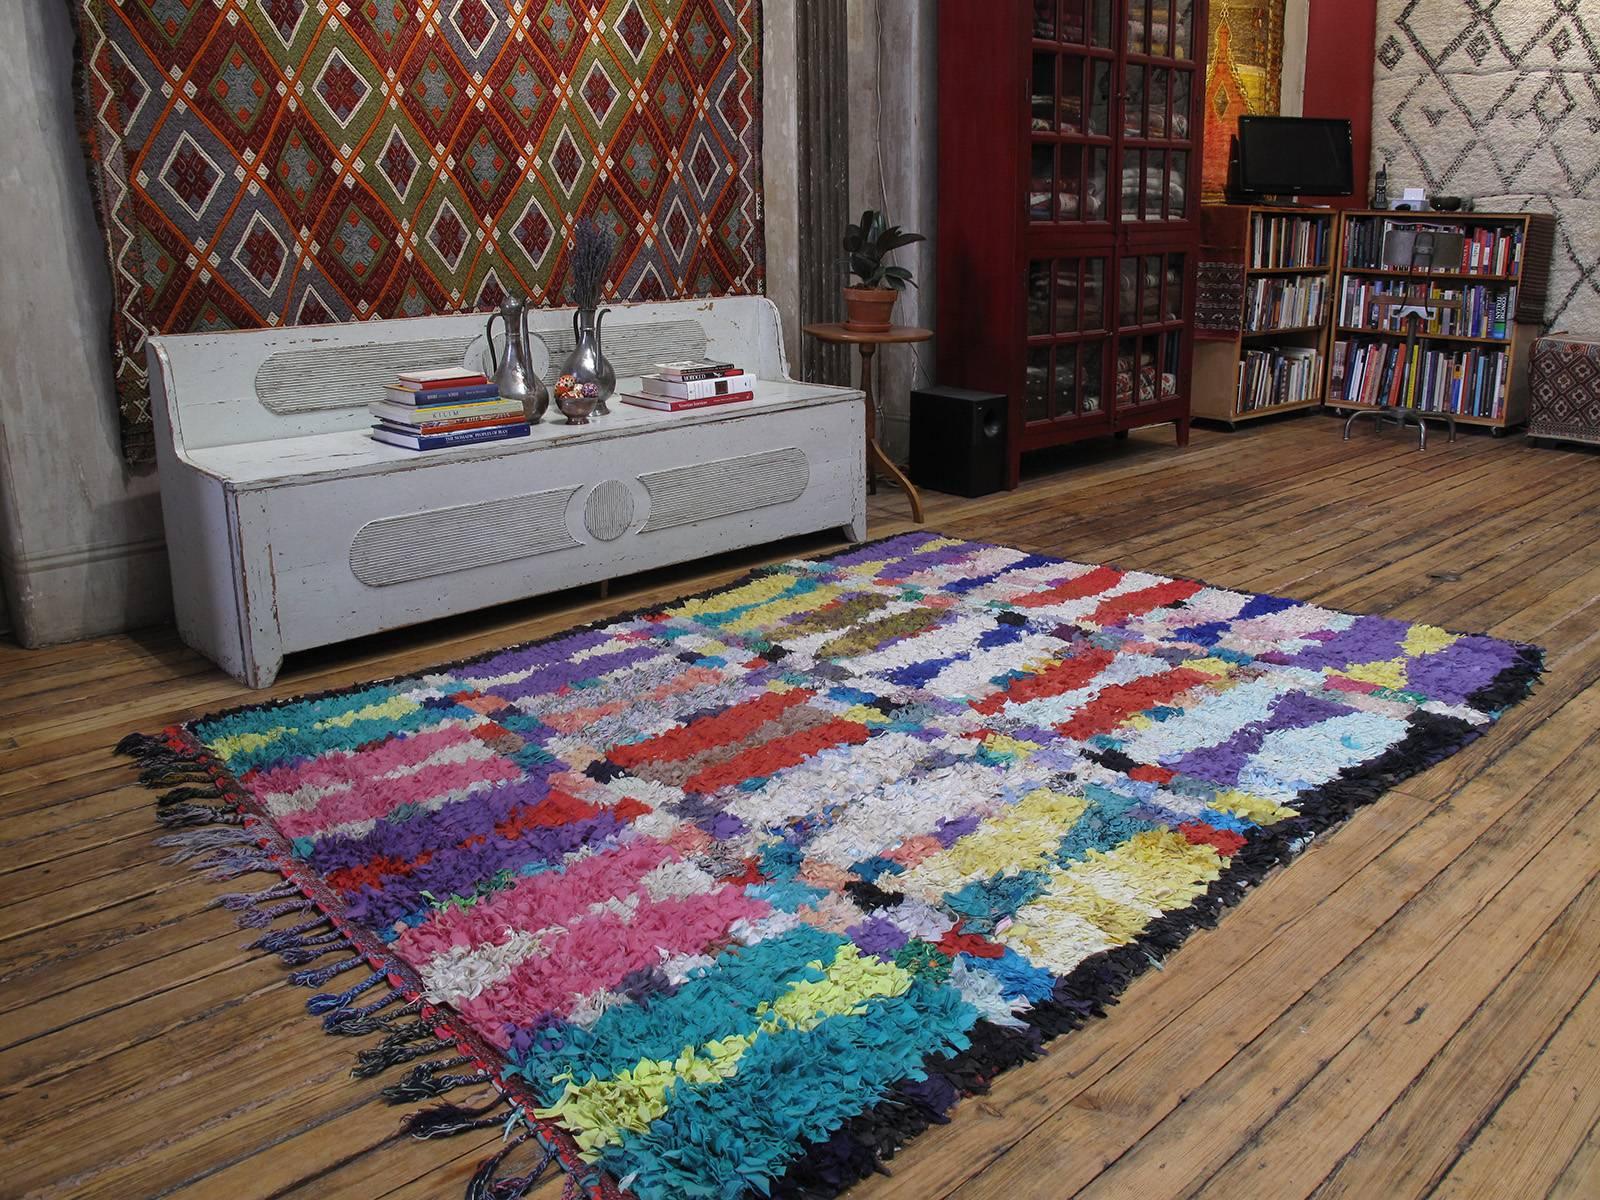 A Moroccan rug, woven entirely with cut-up pieces of fabric from old clothes, etc. - boucherouite means rag or torn cloth in Moroccan Arabic. This is a great example of this type in unusually large format.

A relatively recent phenomenon, such